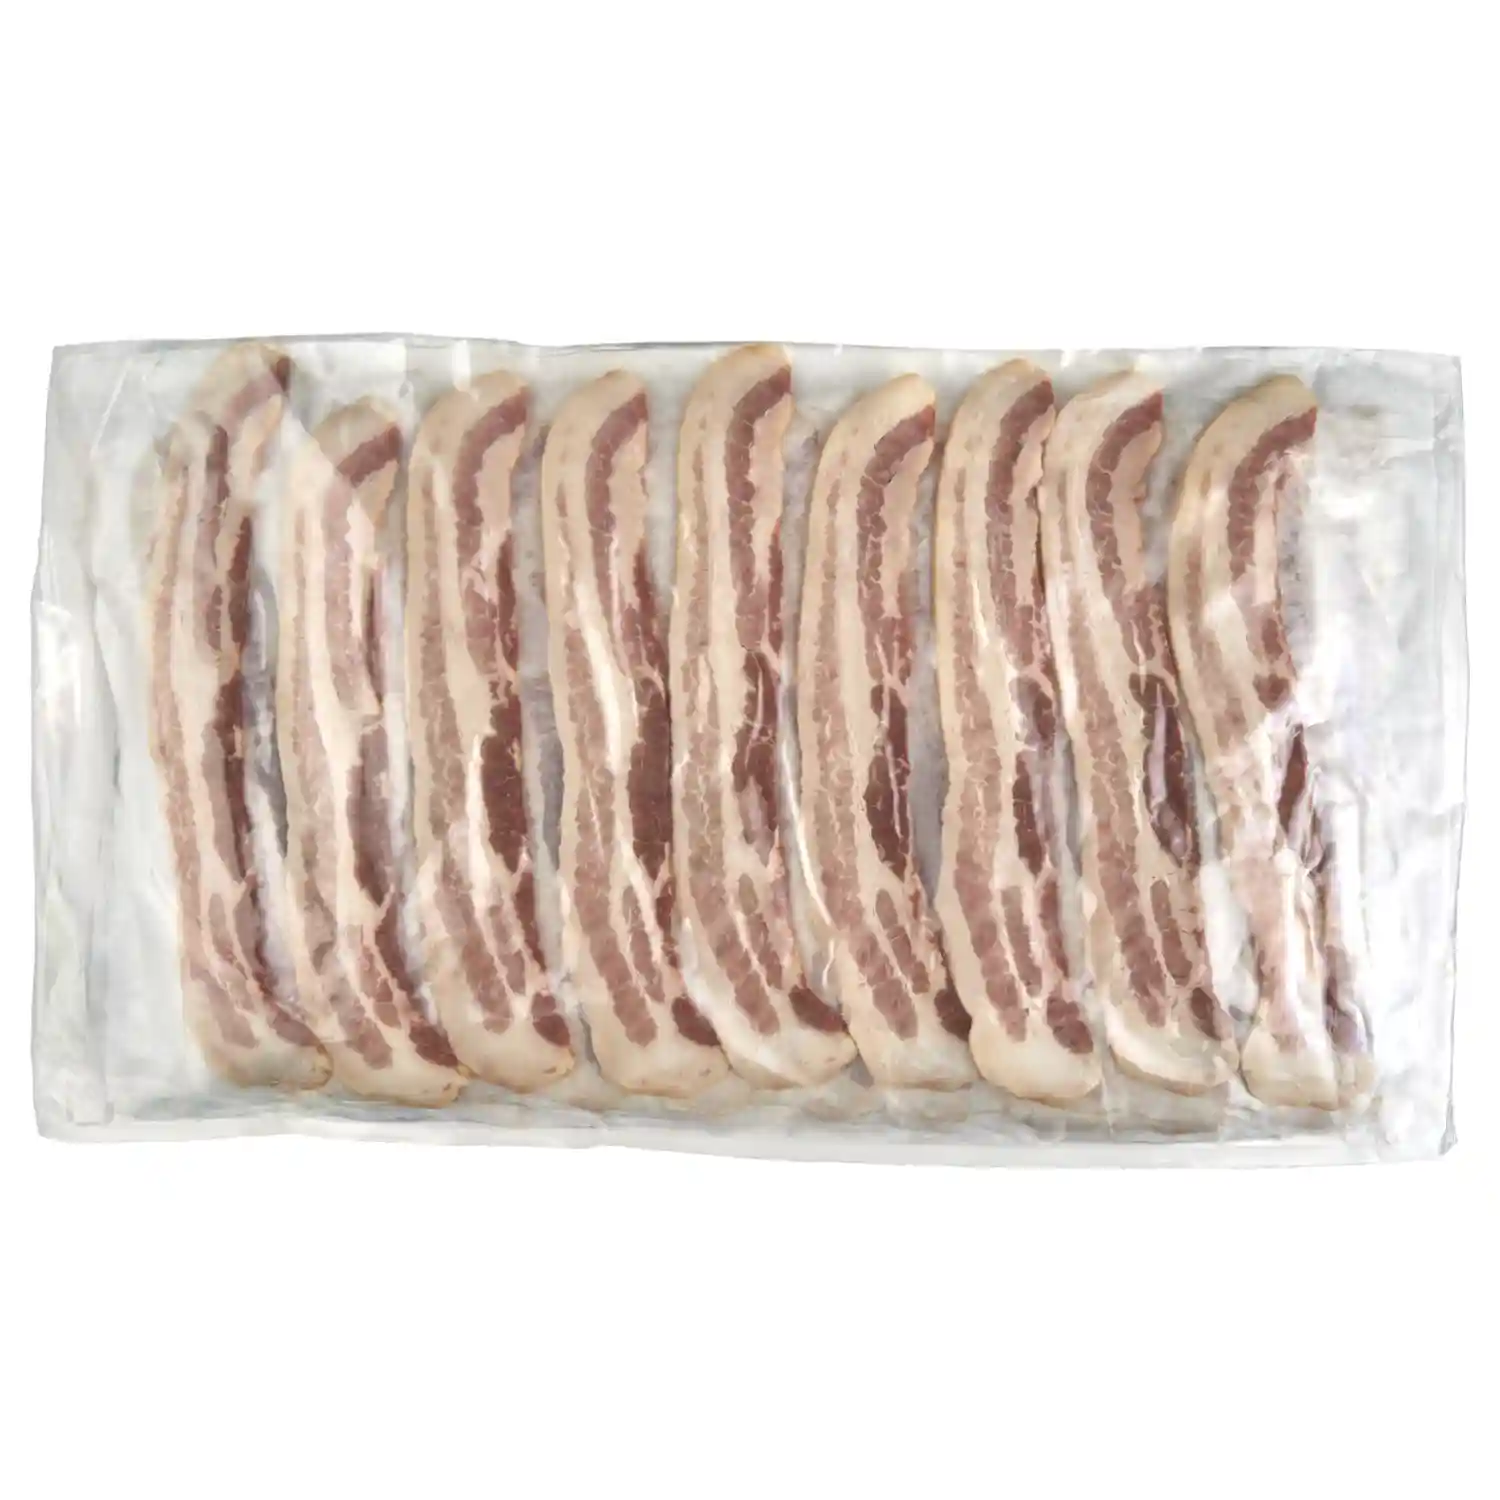 Wright® Brand Naturally Hickory Smoked Thin Sliced Bacon, Flat-Pack®, 15 Lbs, 18-22 Slices per Pound, Gas Flushed_image_31